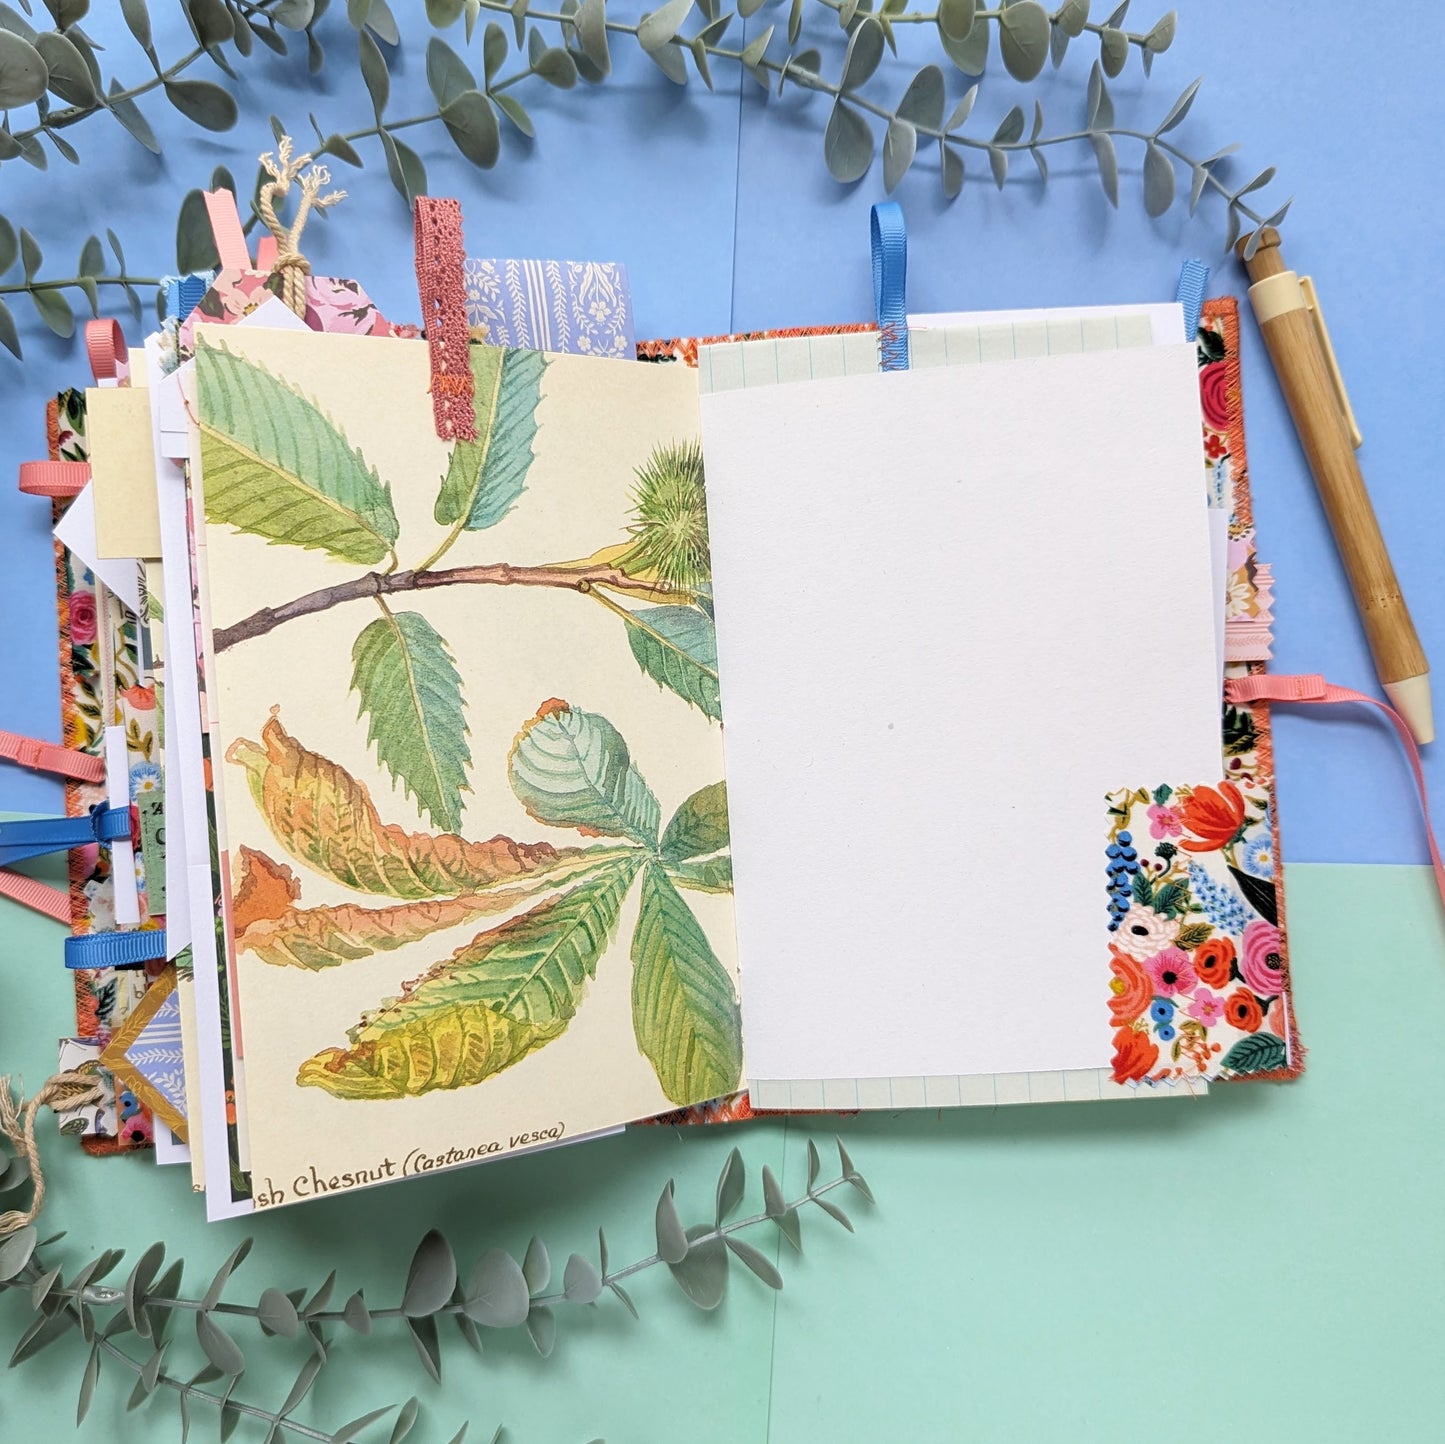 Handmade Rifle Paper Co Fabric Cover Journal